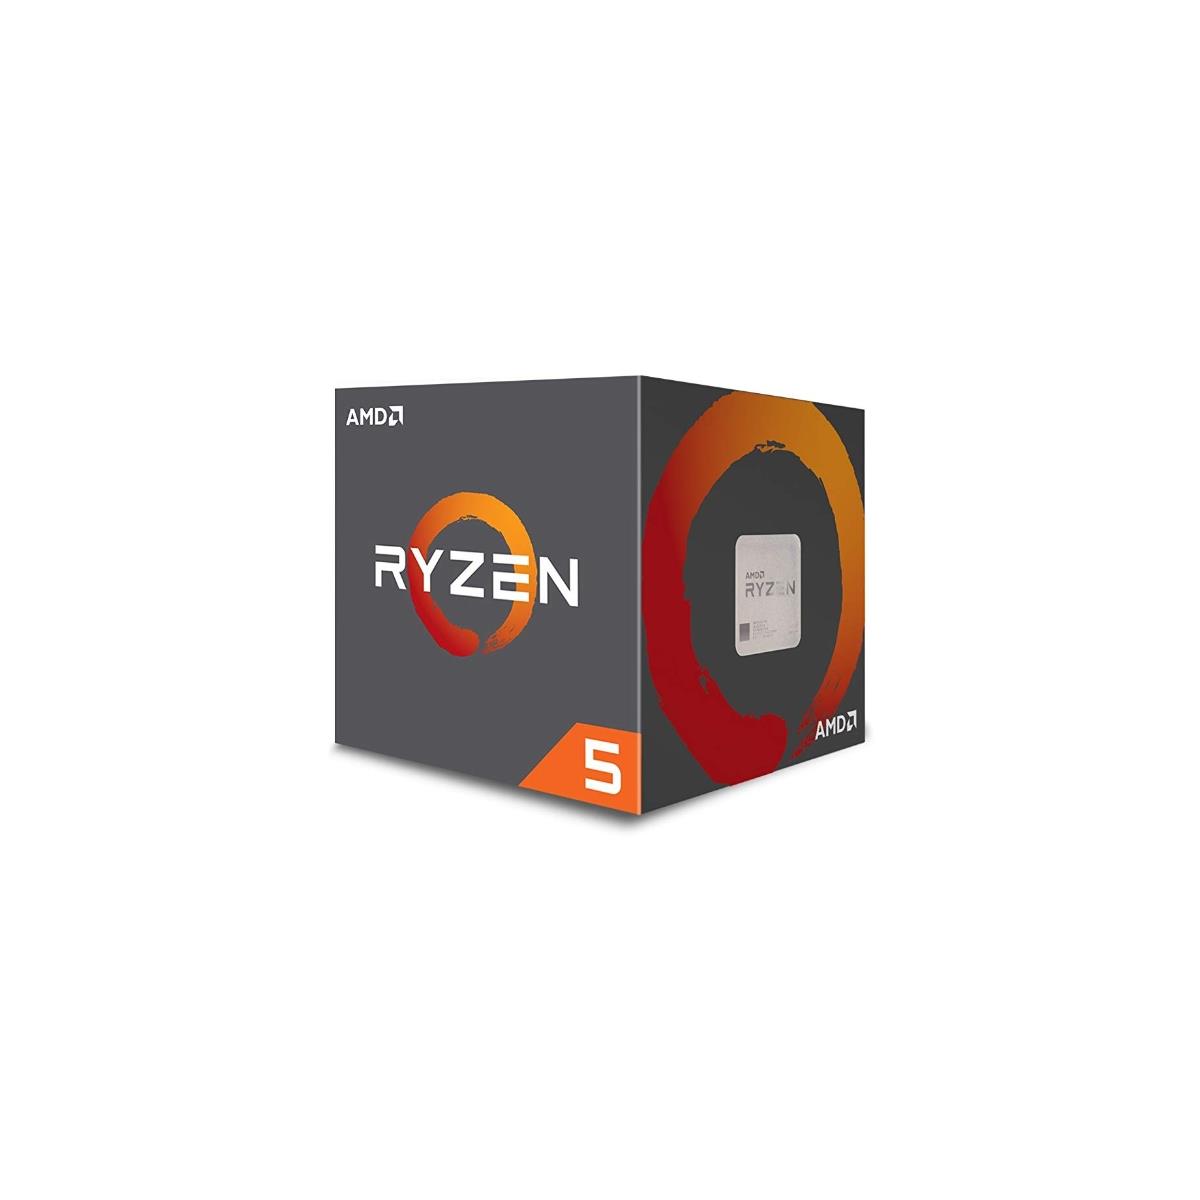 Contest Retire Customer This AMD Ryzen 5 2600 Hot Deal Is $150 At Newegg With Two Bonus Digital  Game Downloads | HotHardware